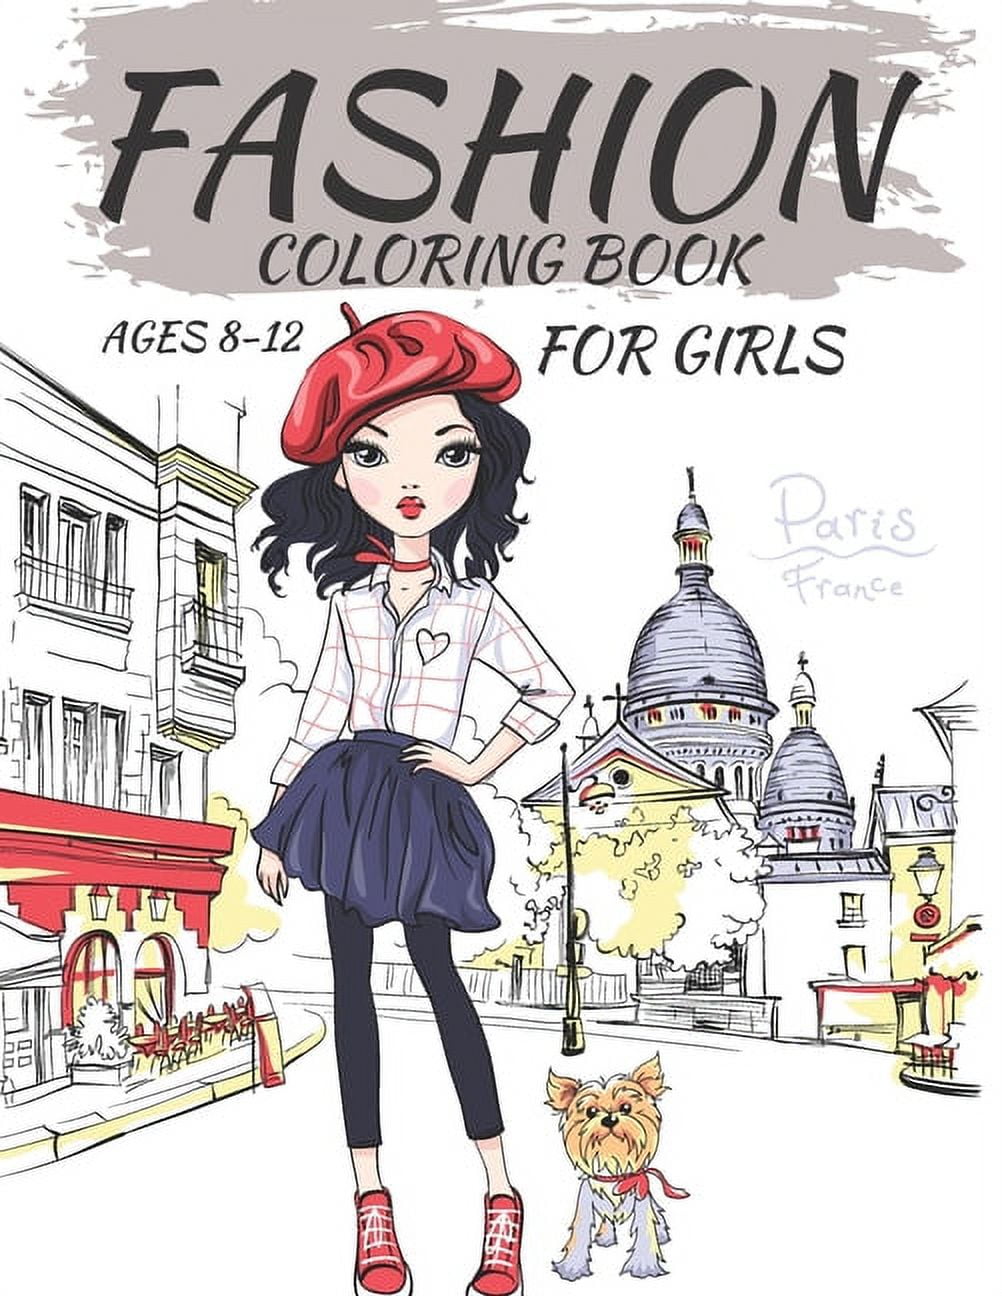 FASHION COLORING BOOK FOR GIRLS age 8-12: Older Girls & Teenagers